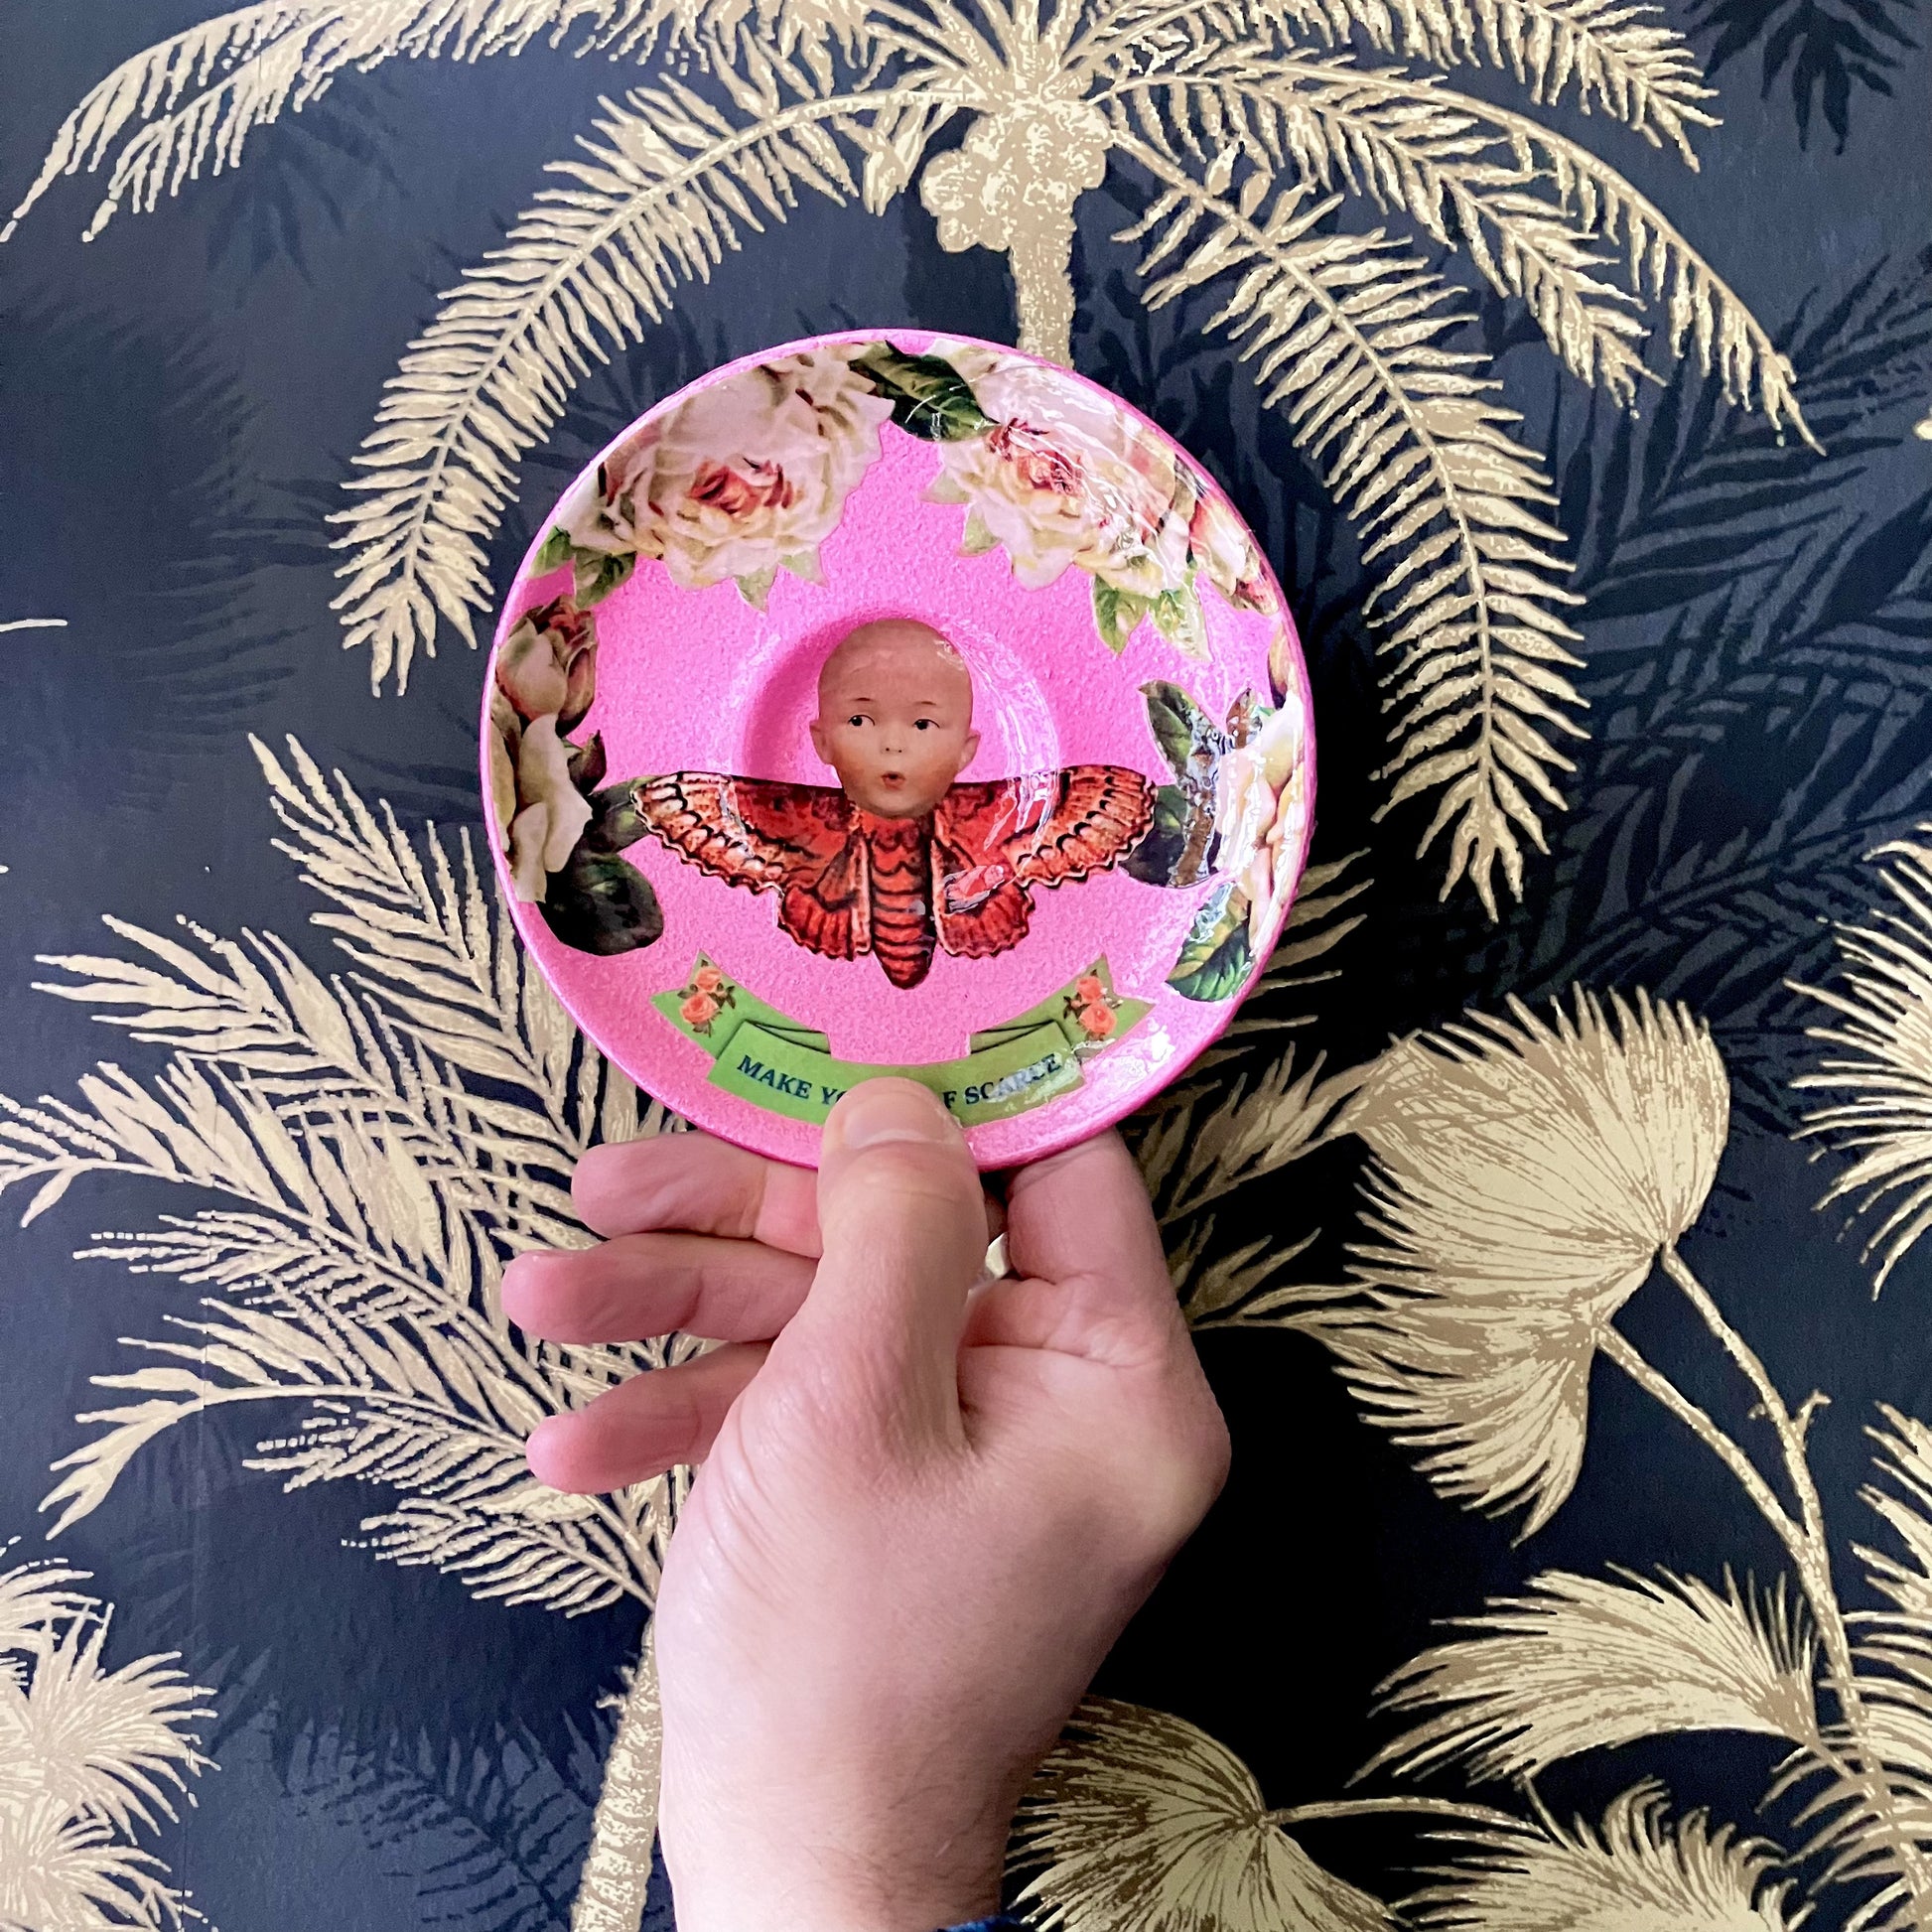 "Make Yourself Scarce" Trinket Dish by House of Frisson. Featuring a moth with doll head, framed by roses, on a pink background. Holding dish against a wall.